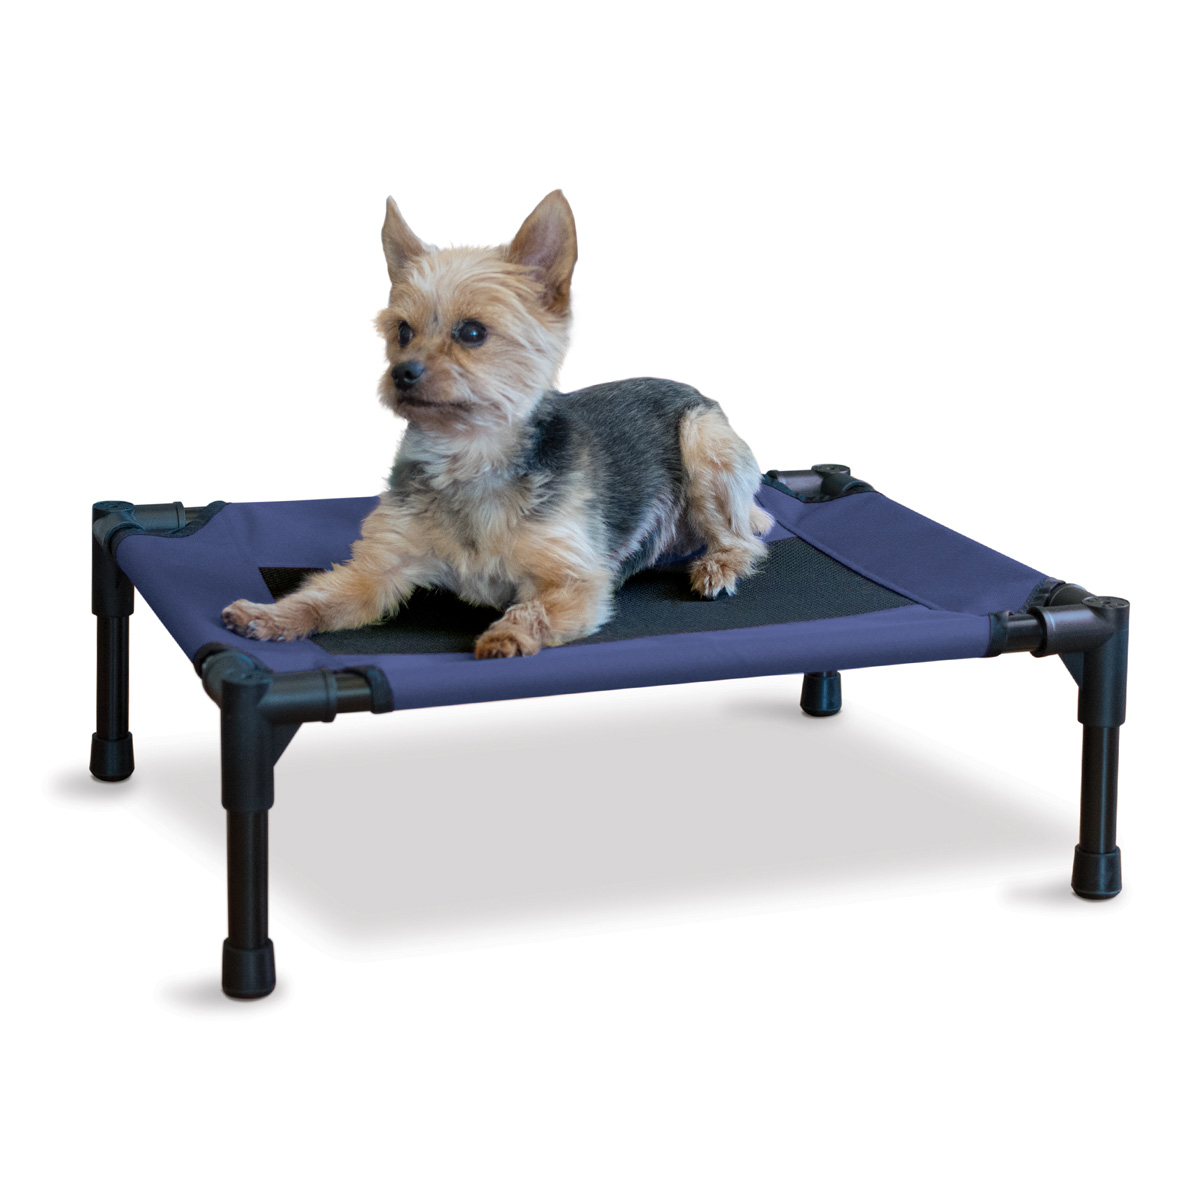 K & H Pet Products Elevated Pet Bed - Small